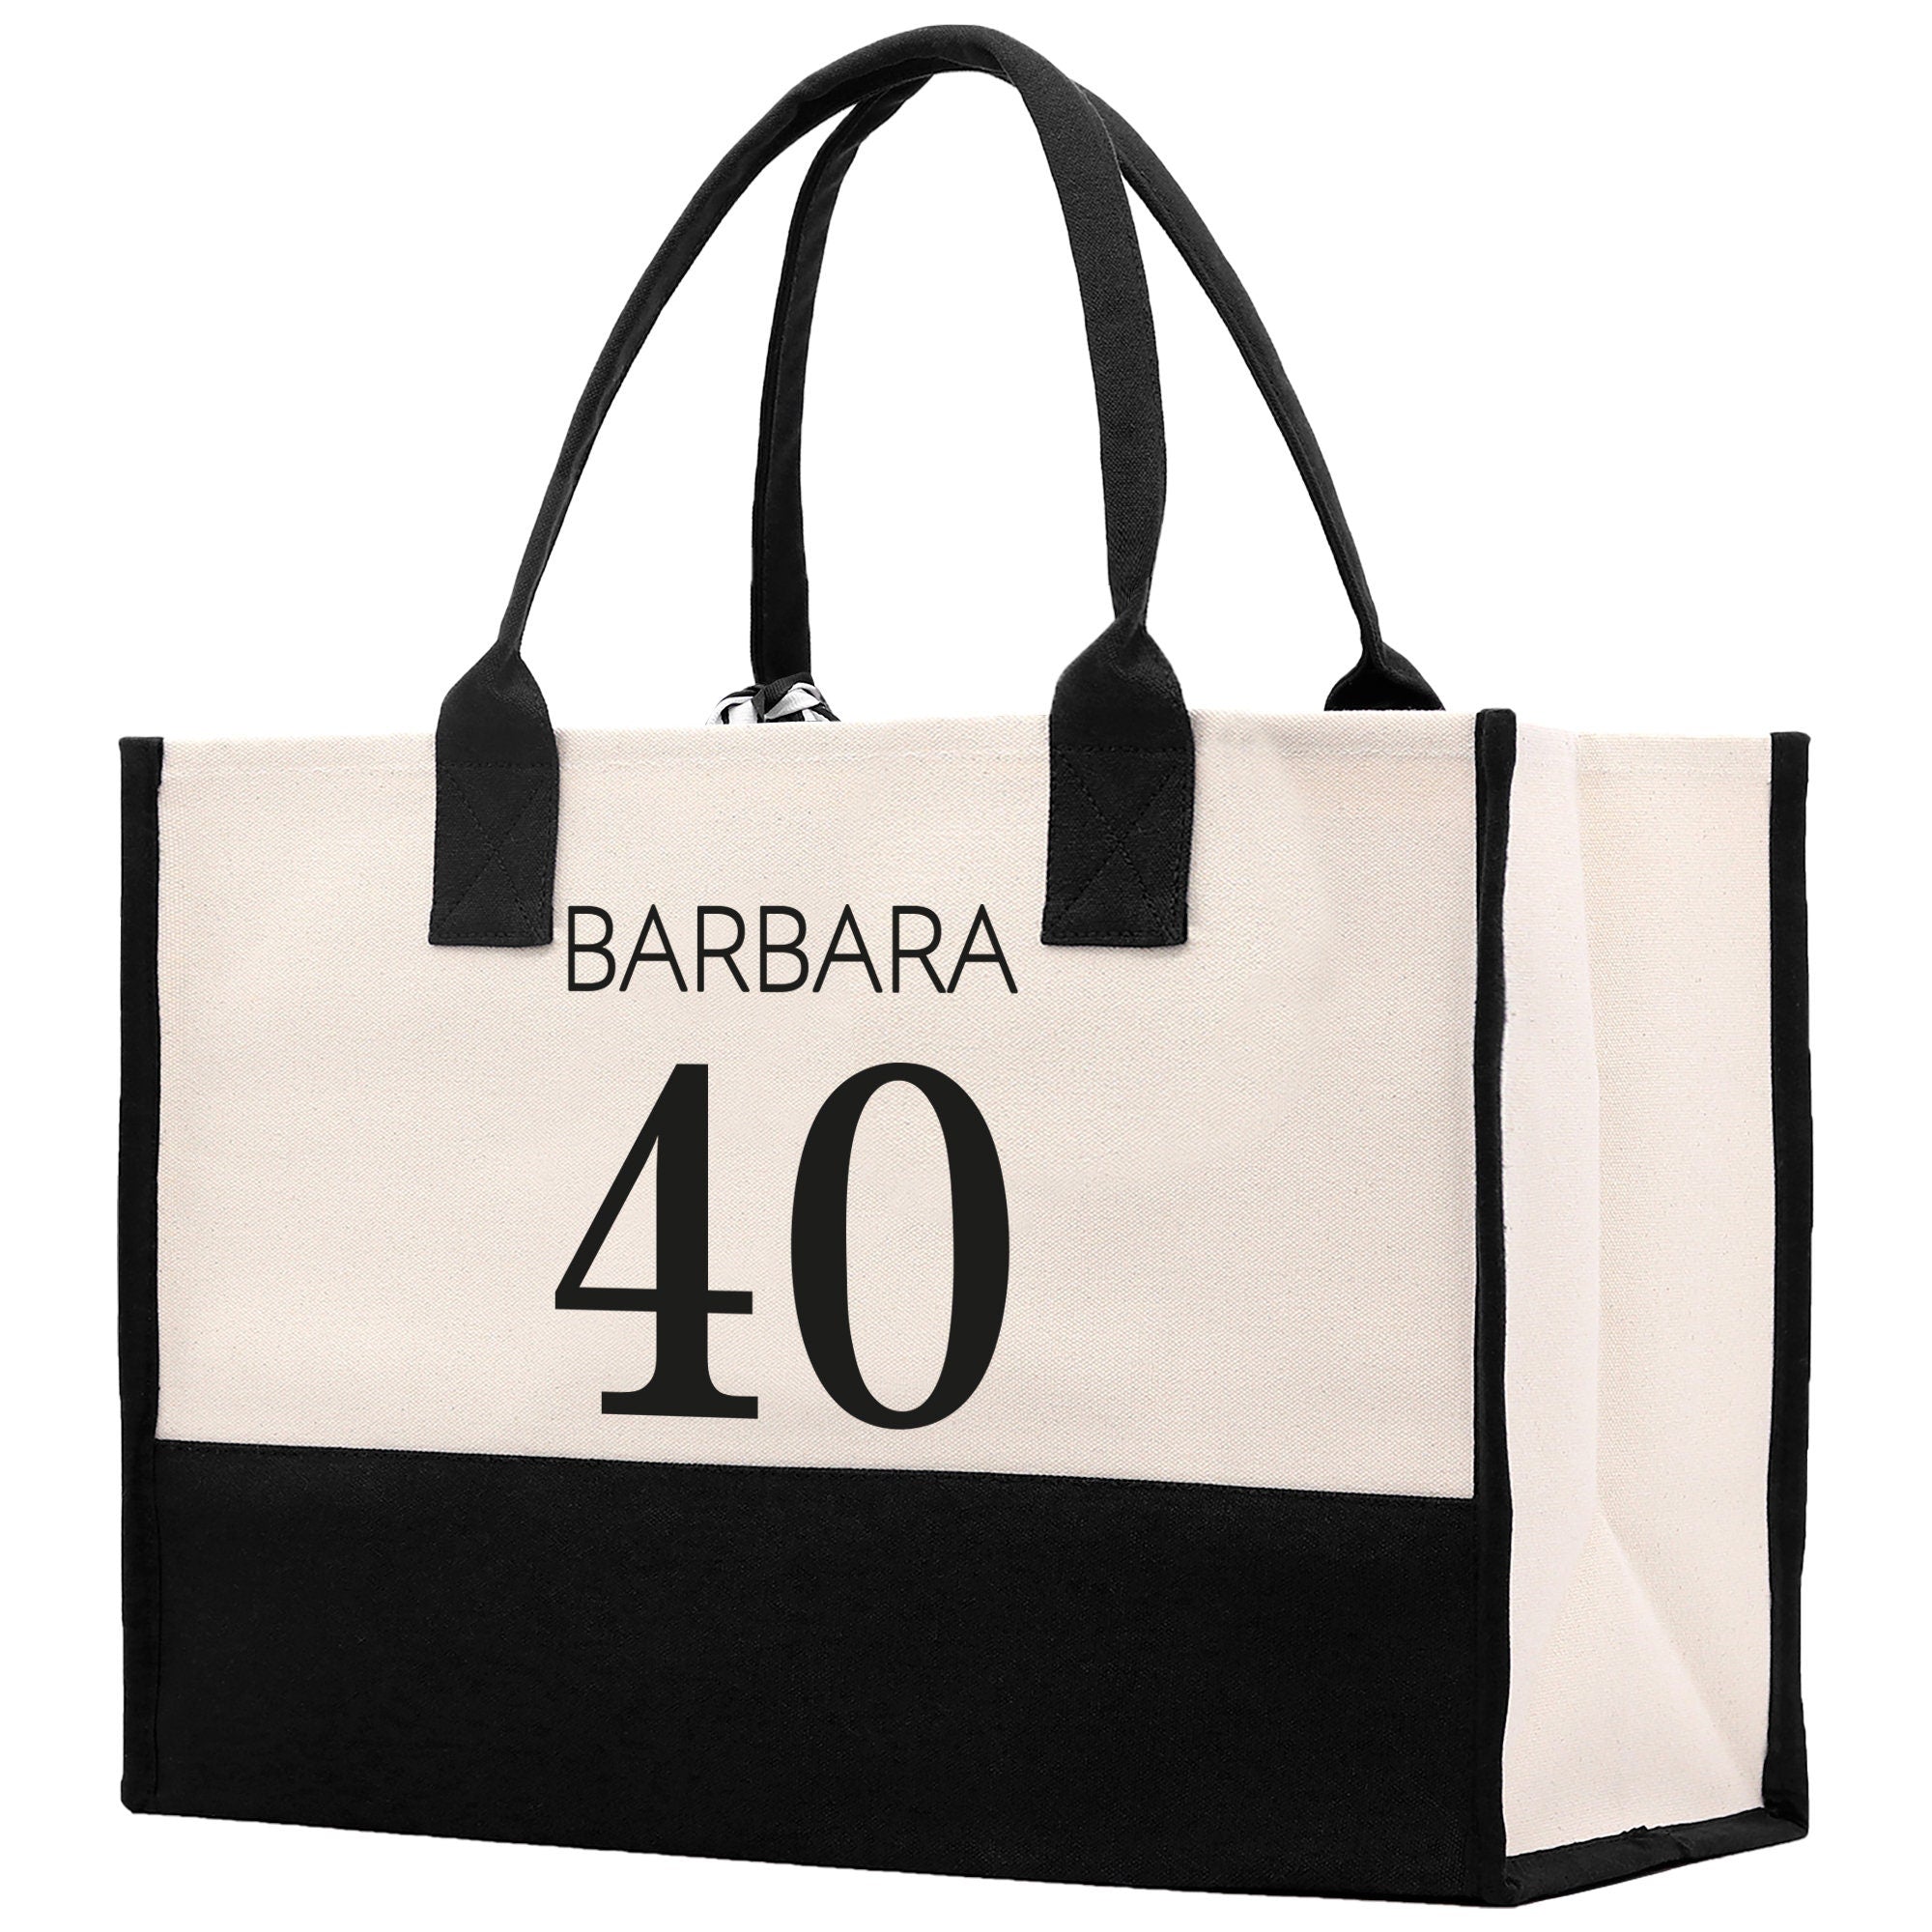 a black and white shopping bag with the number forty on it